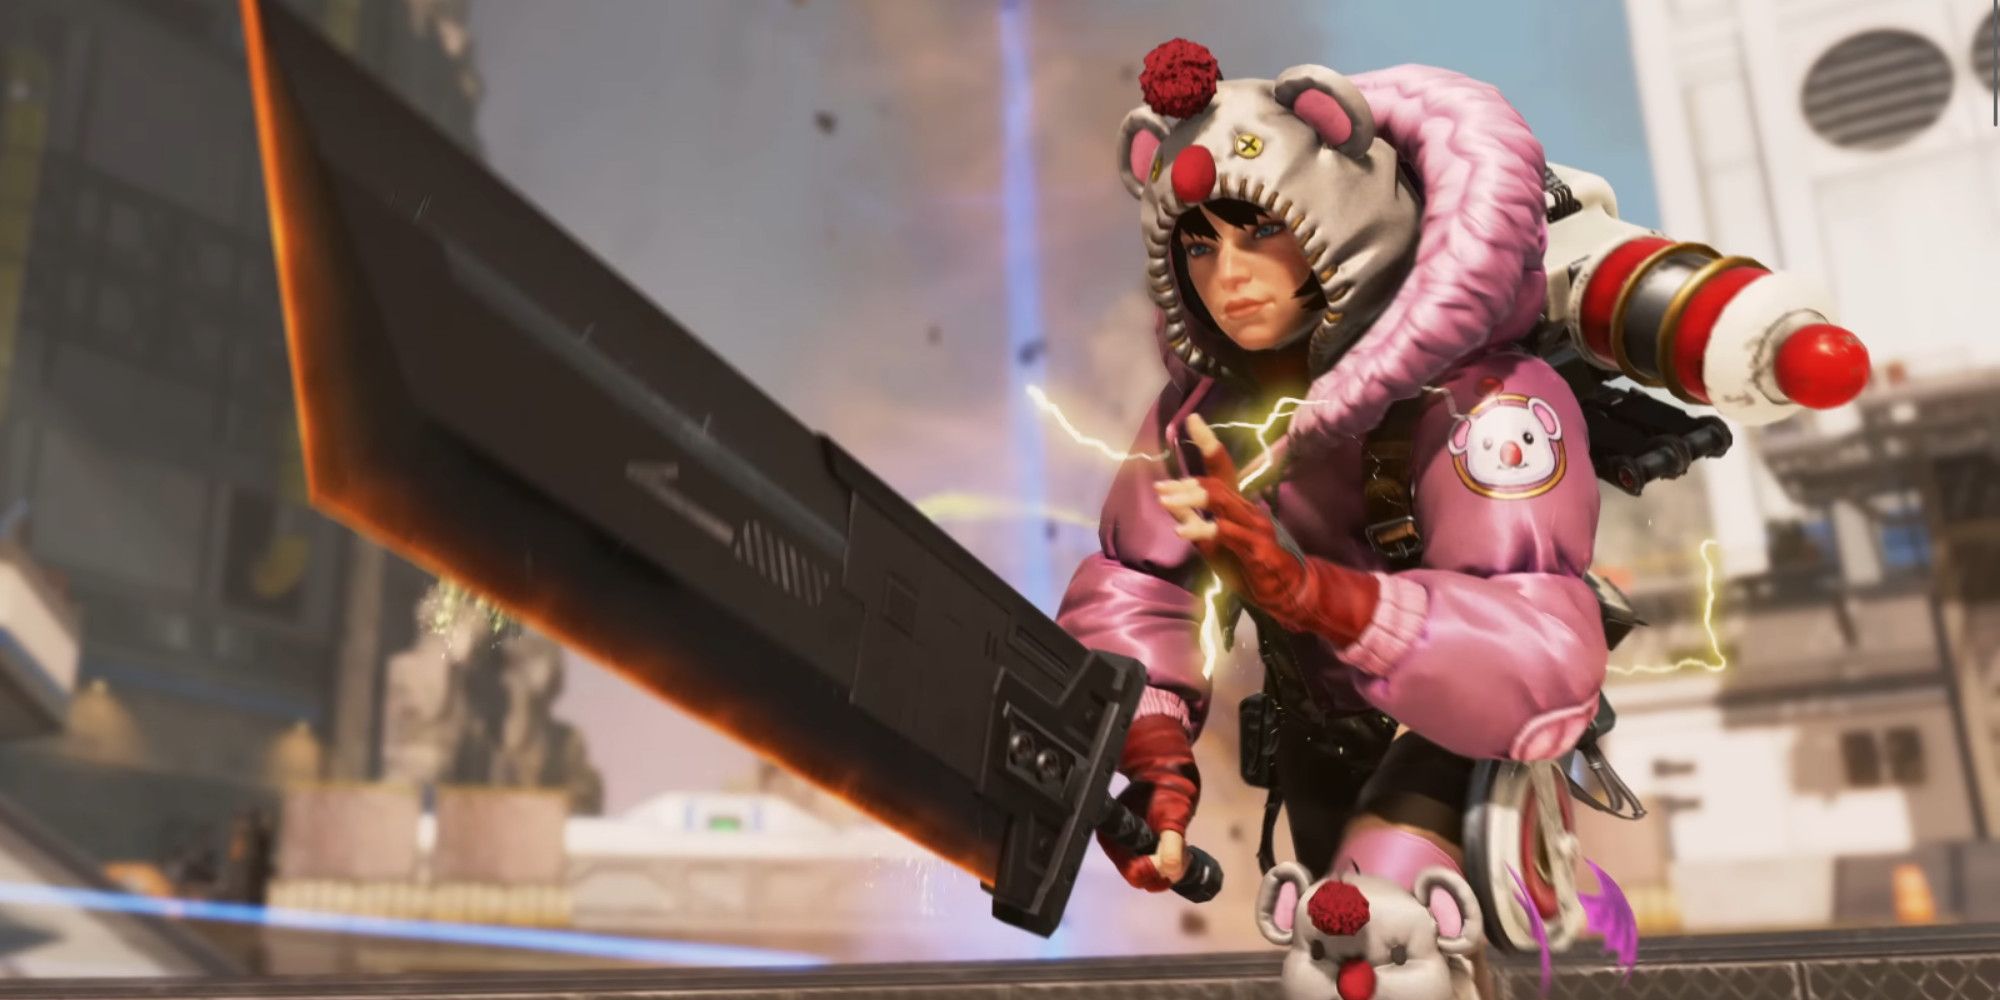 An Apex Legends character dressed as Yuffie from Final Fantasy holding a Buster Sword